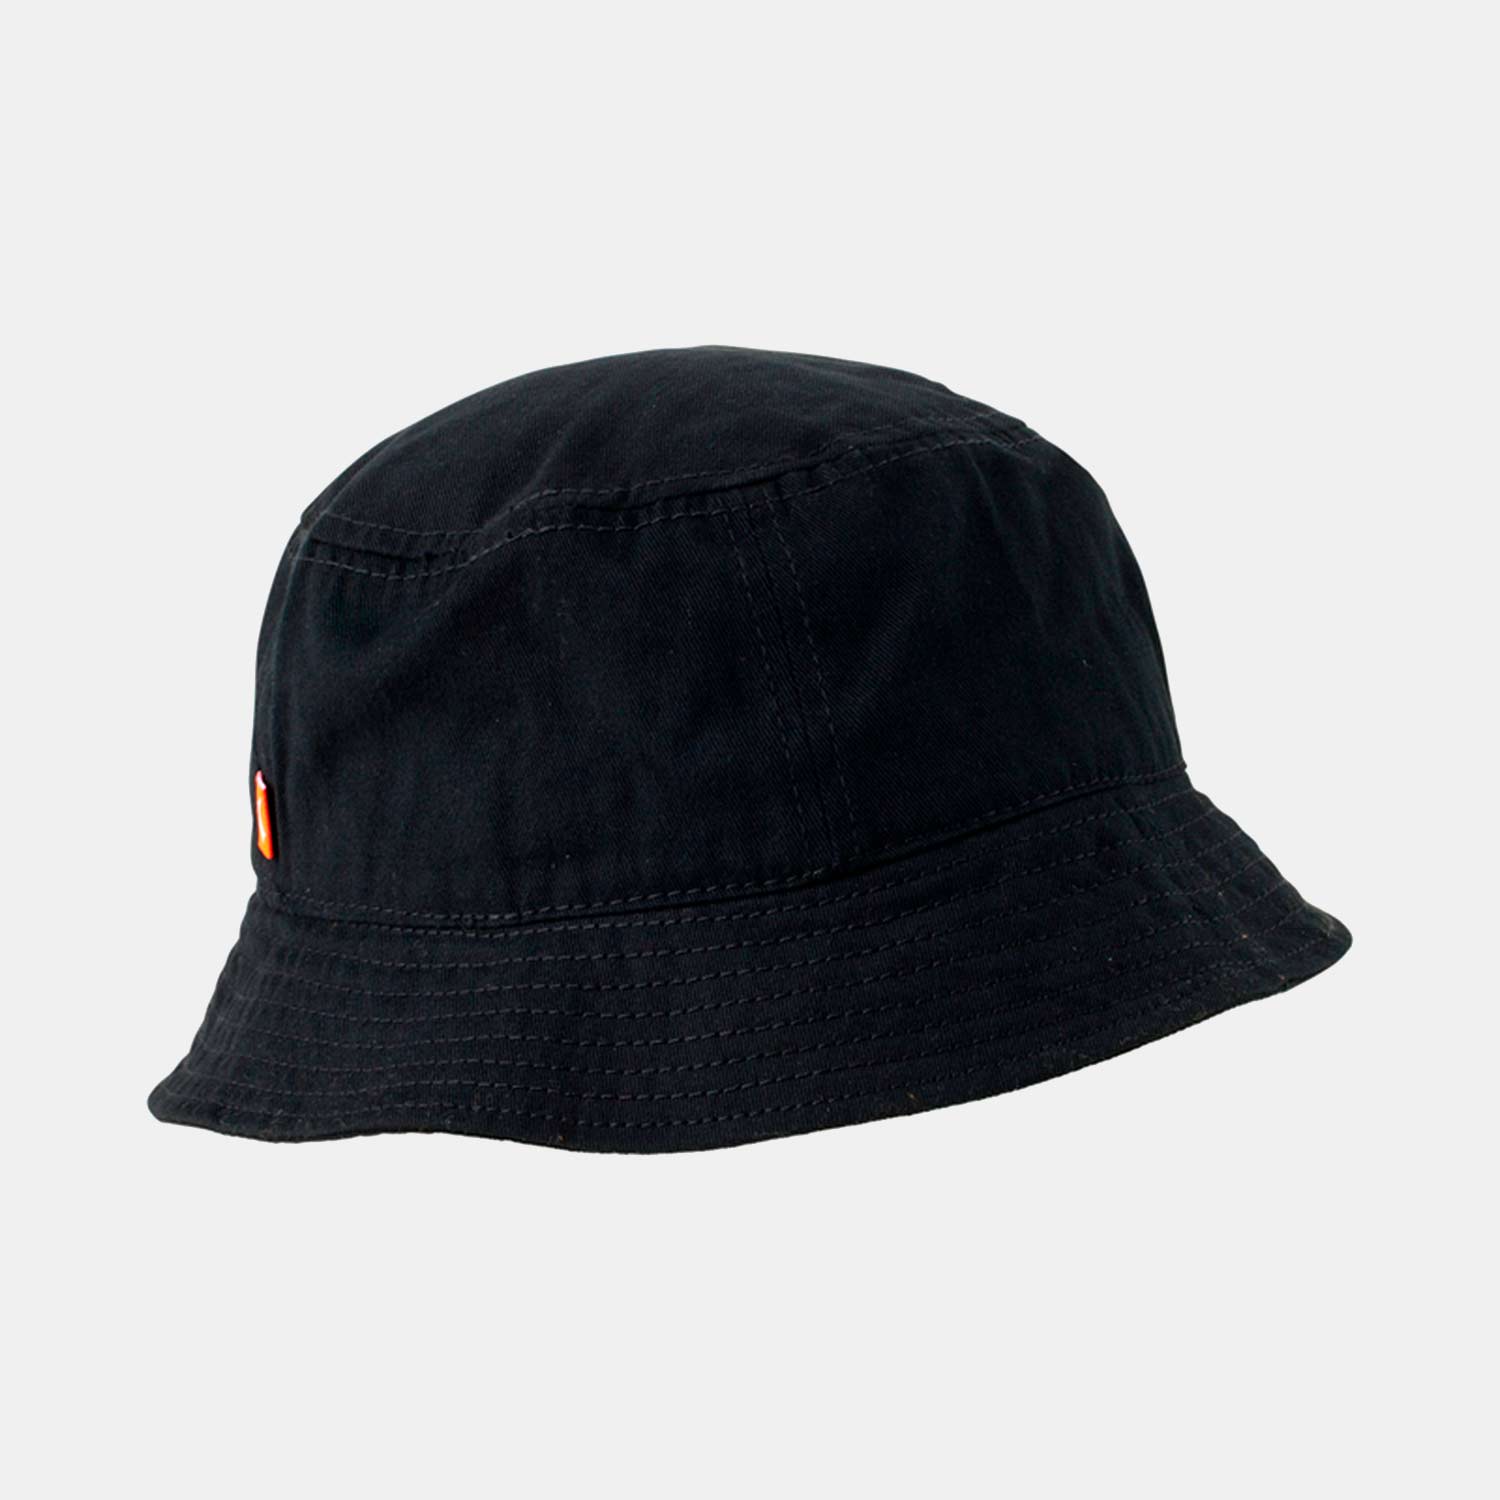 SA Viestimies (Finland Signaller) Bucket Hat for Sale by